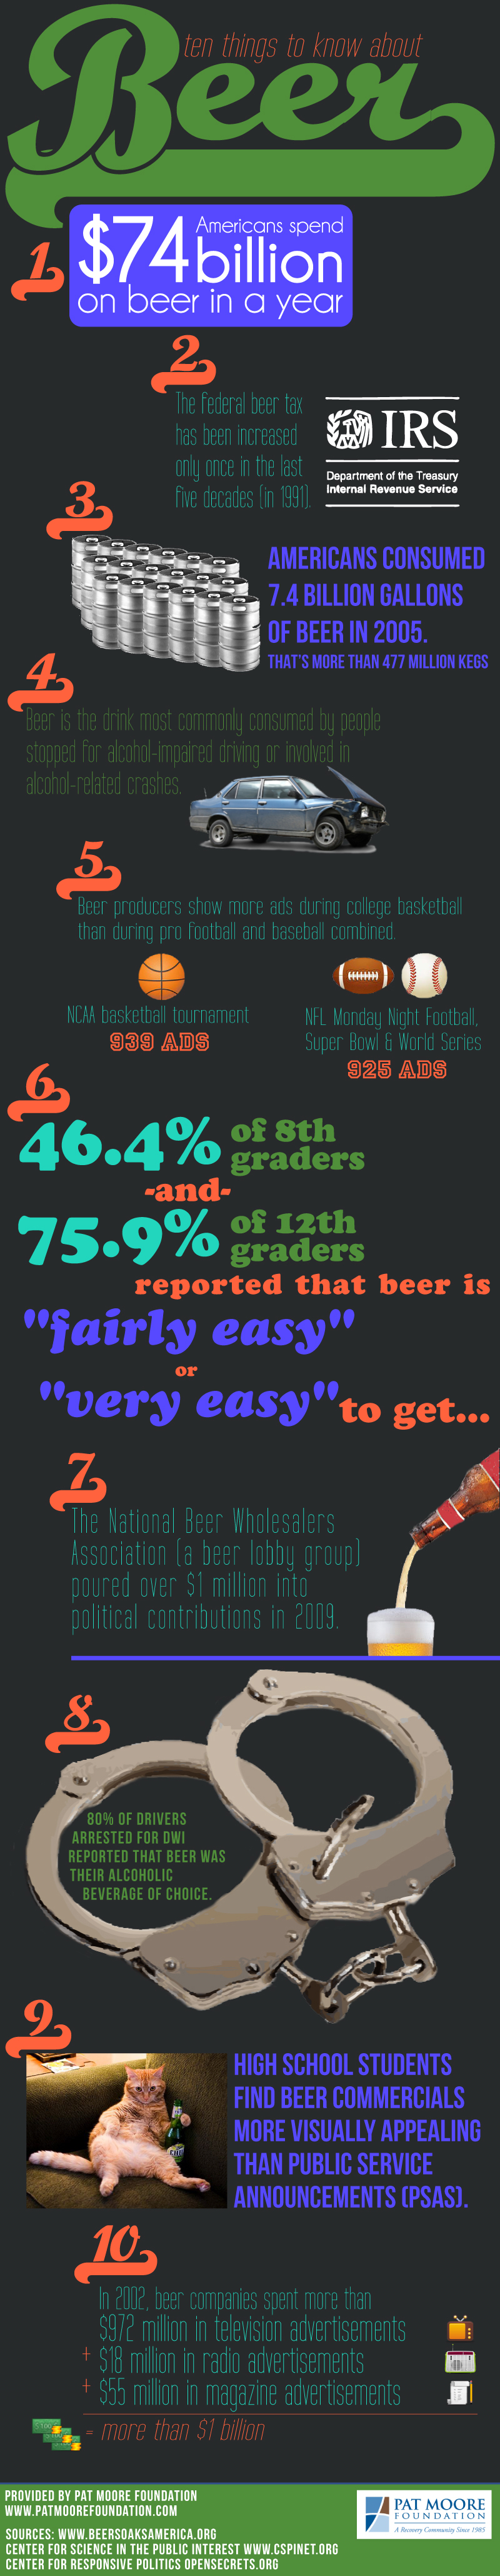 10 Things to Know About Beer